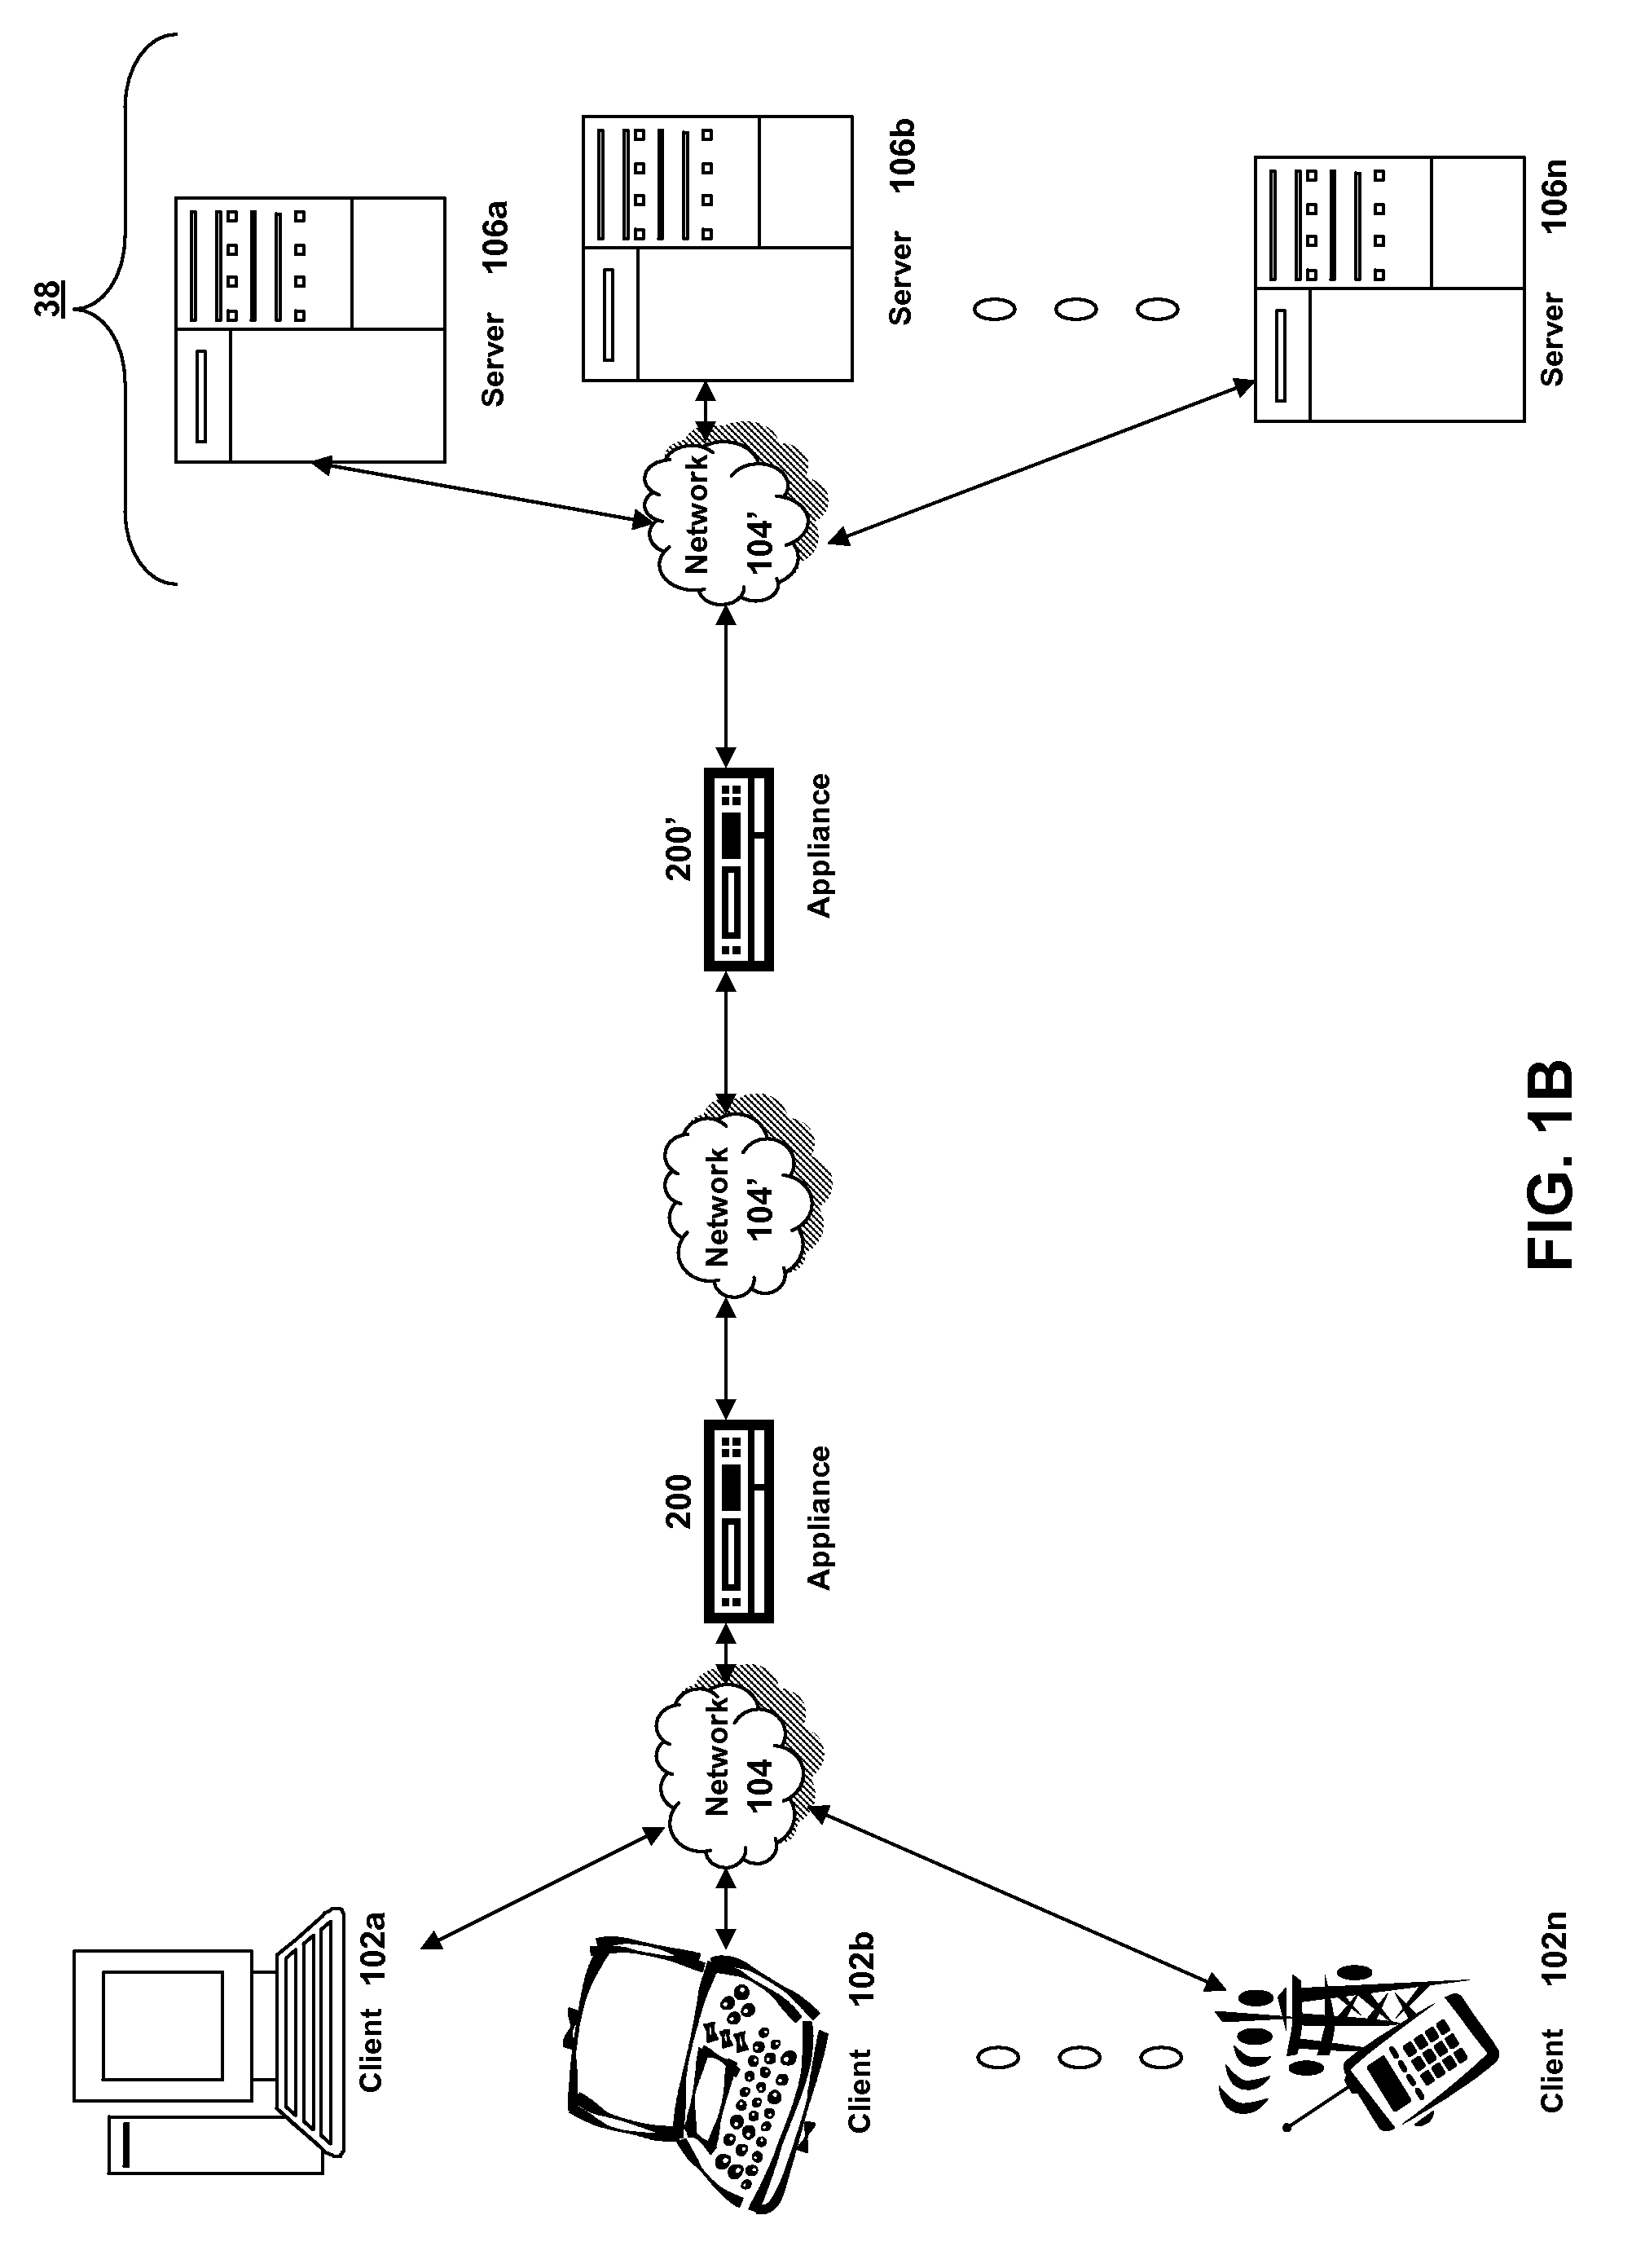 Systems and methods for providing structured policy expressions to represent unstructured data in a network appliance